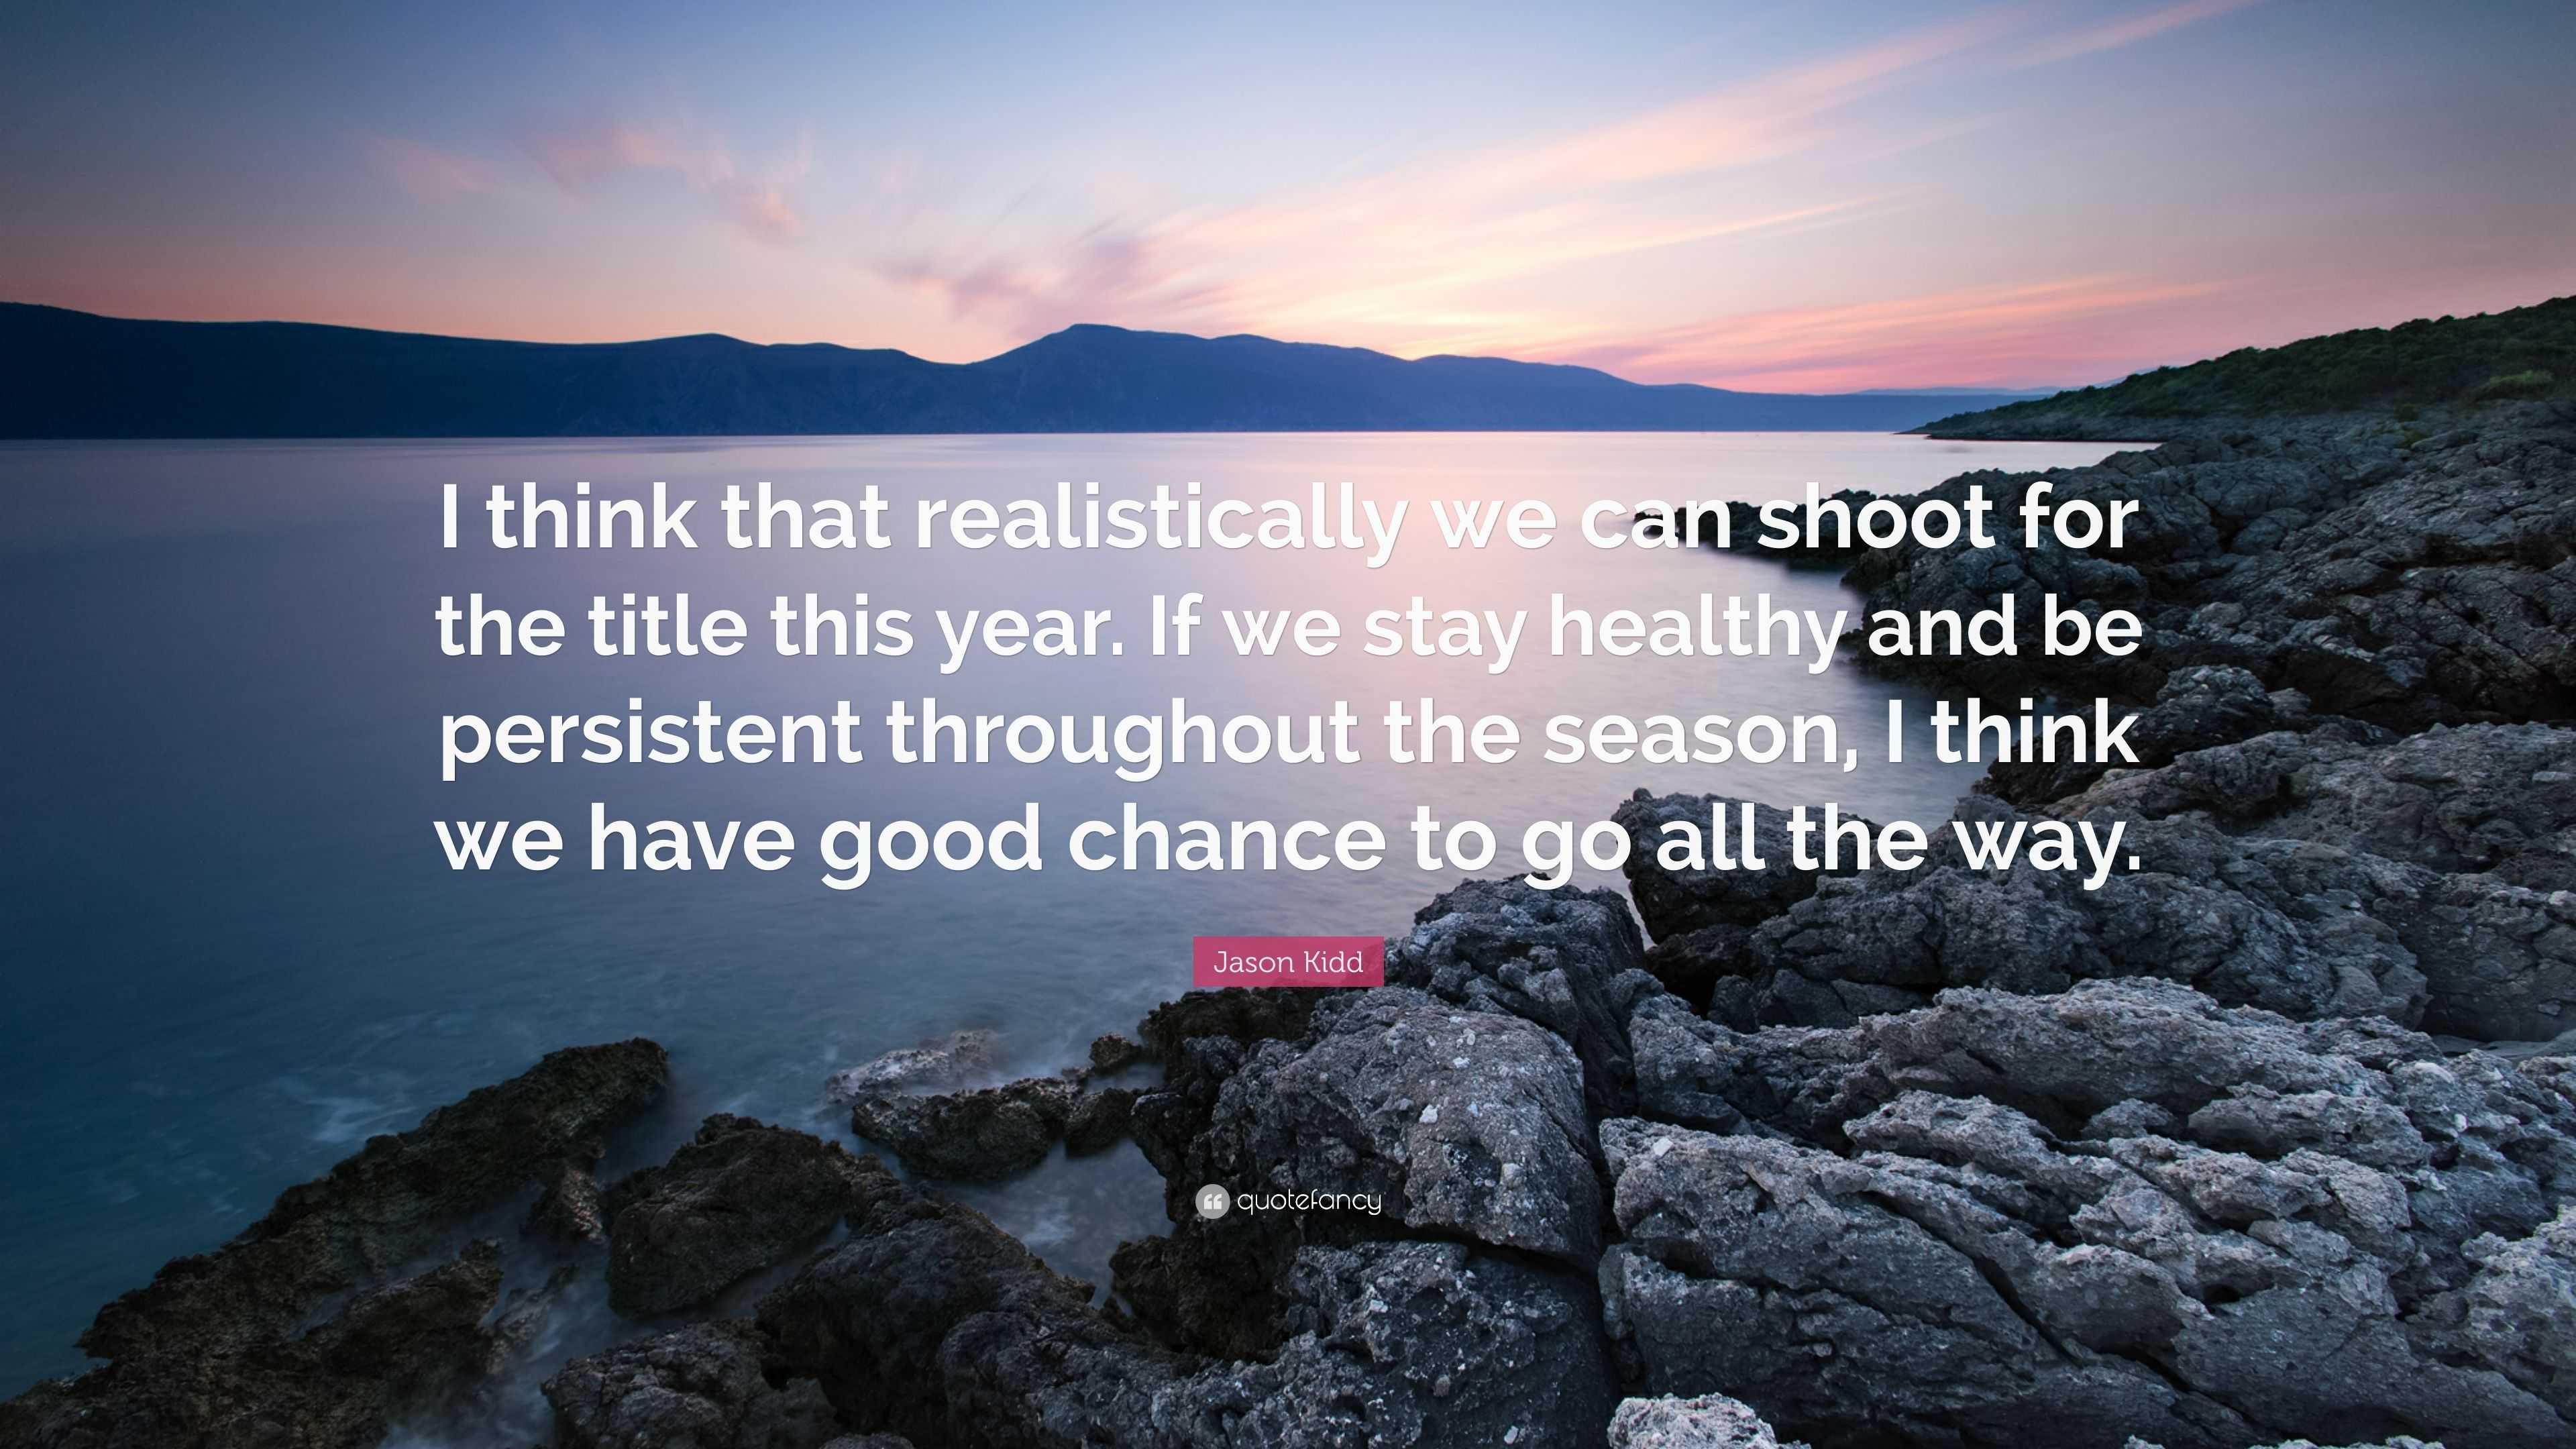 https://quotefancy.com/media/wallpaper/3840x2160/2718861-Jason-Kidd-Quote-I-think-that-realistically-we-can-shoot-for-the.jpg